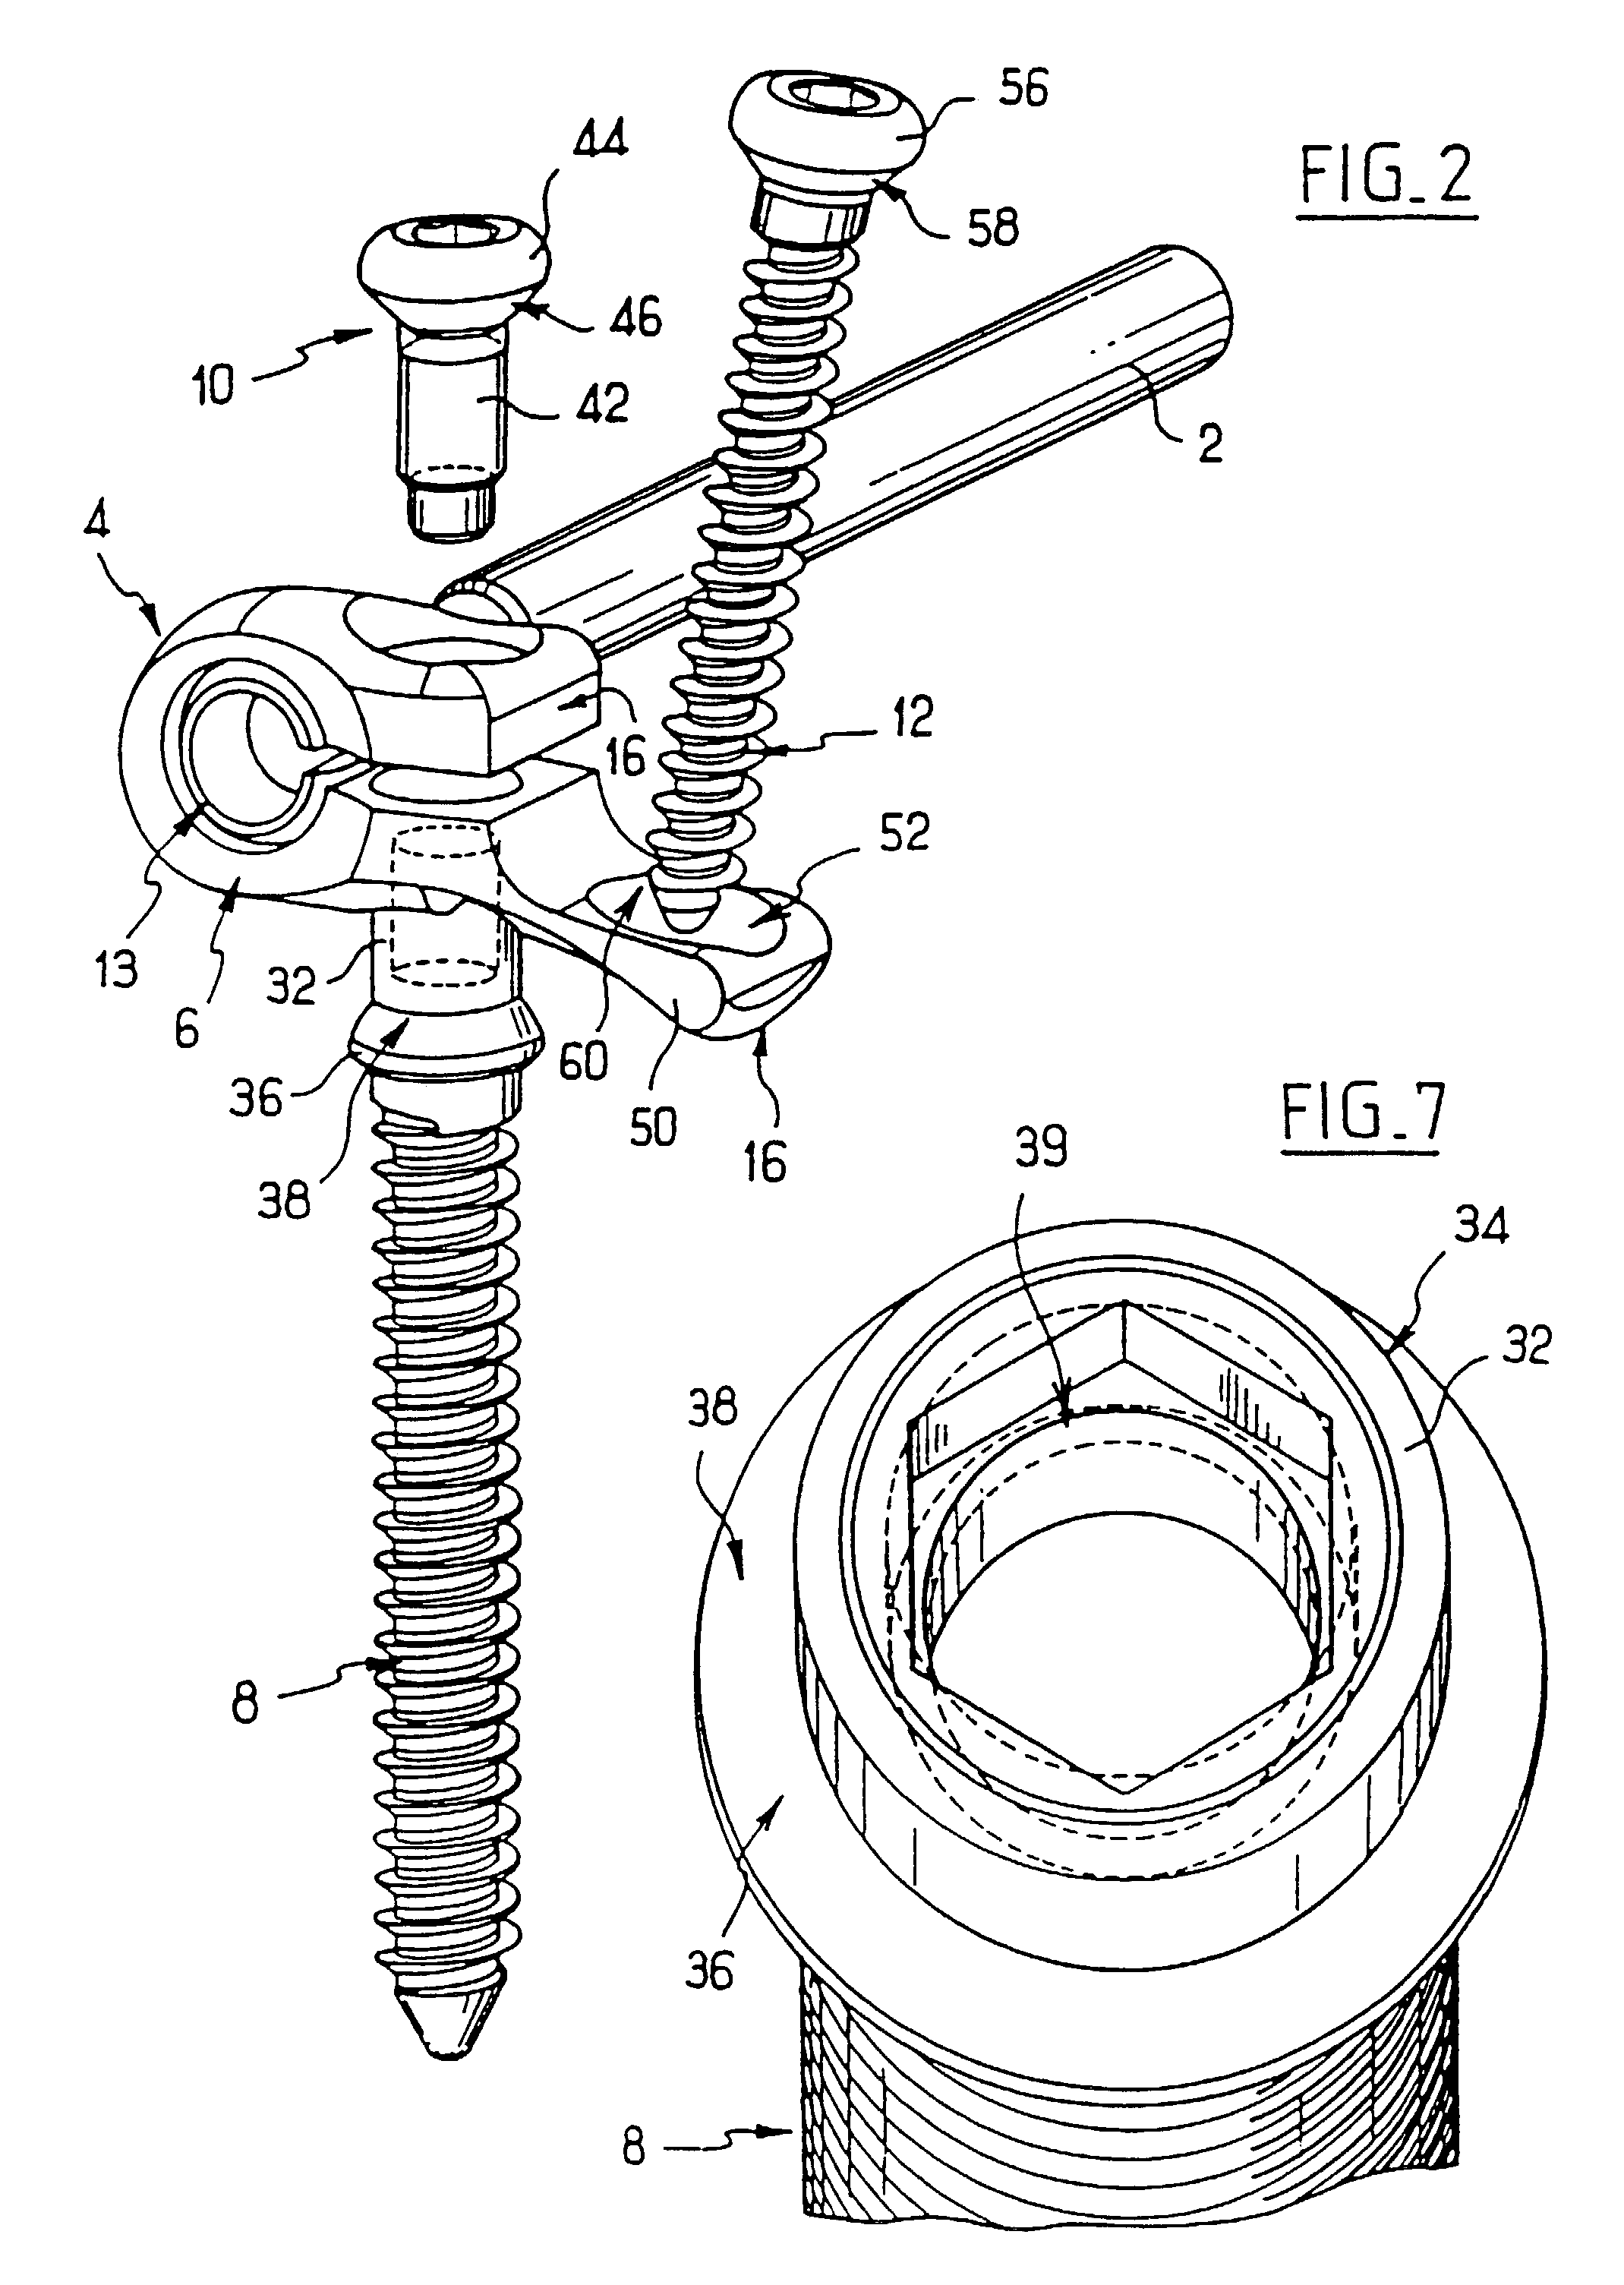 Spinal osteosynthesis system for anterior fixation